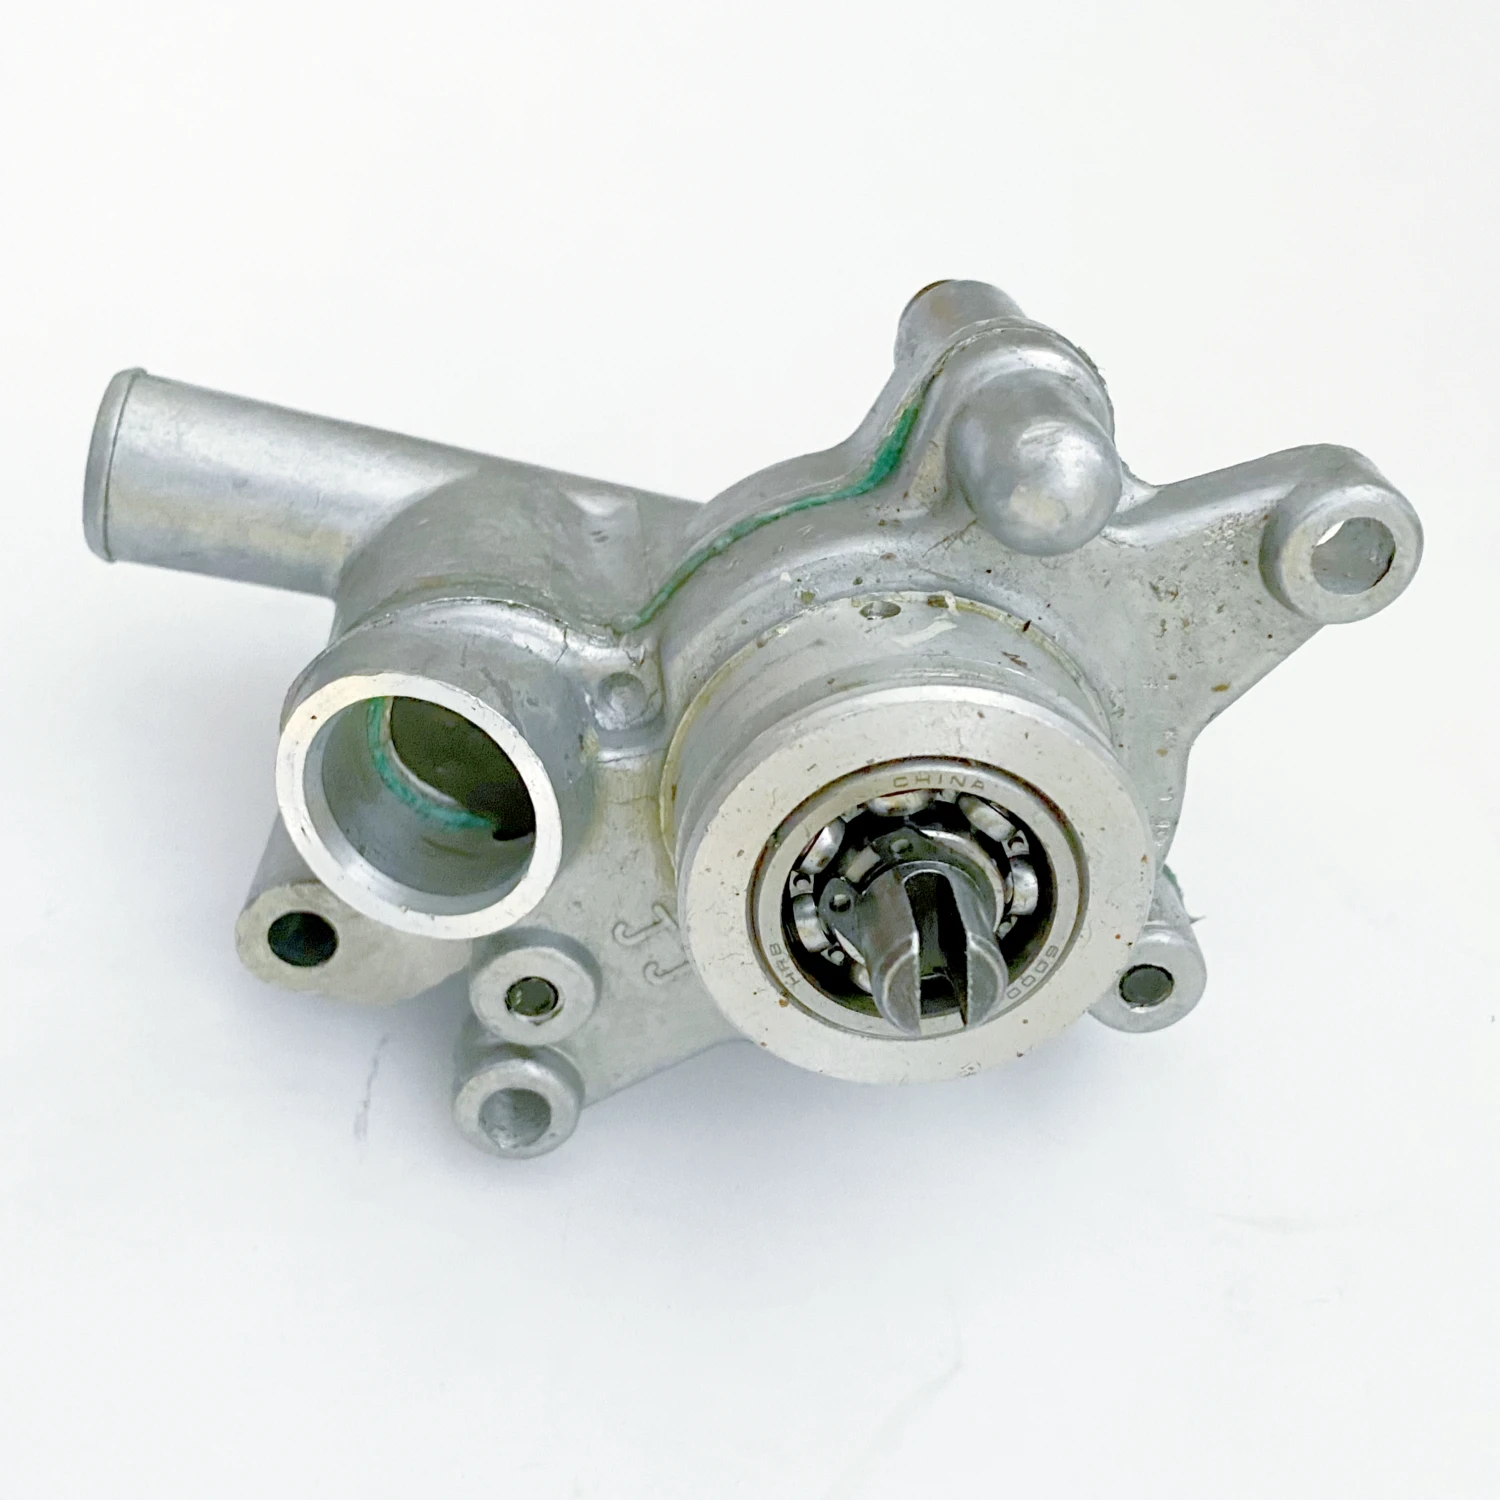 Water Pump Assembly for Stels ATV 300B Buyang 300 Feishen FA-D300 H300 G300 2.1.01.8000 LU019252 one way clutch strater clutch for stels atv 300b buyang 300 feishen fa d300 g300 h300 2 1 01 0290 lu020048